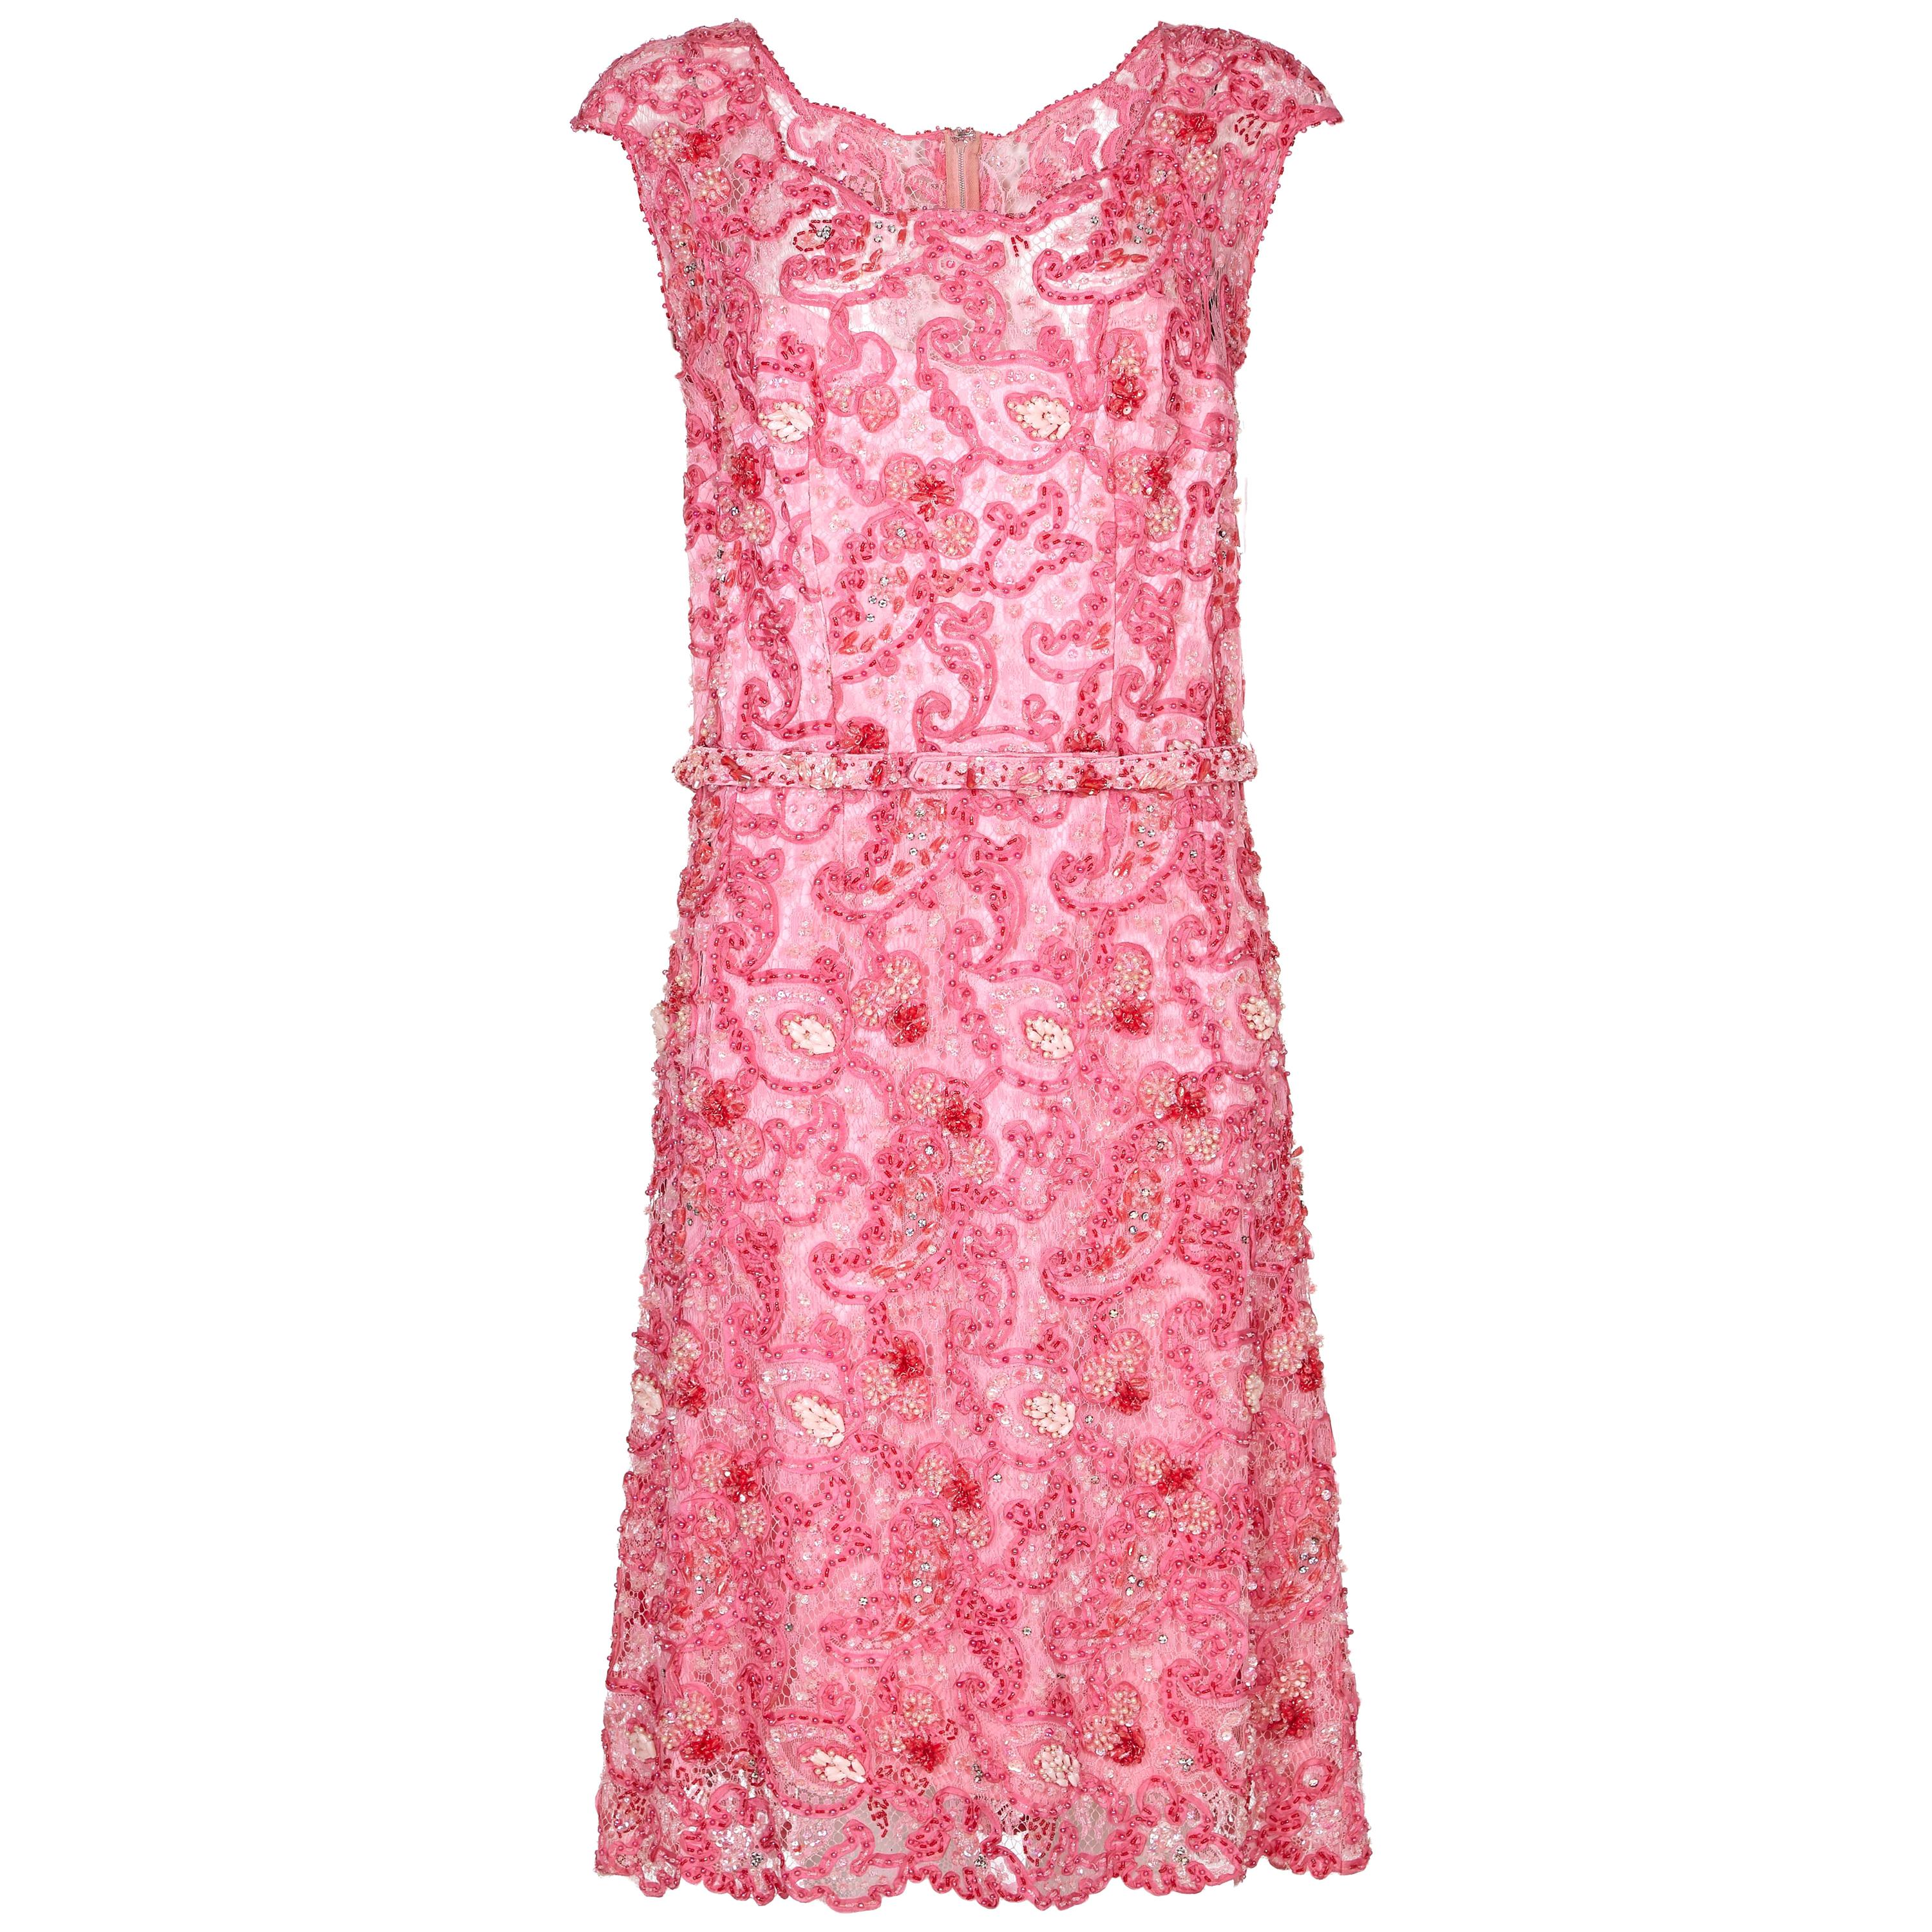 1960s Norman Hartnell Couture Pink Beaded Dress Owned by Dame Barbara Cartland 